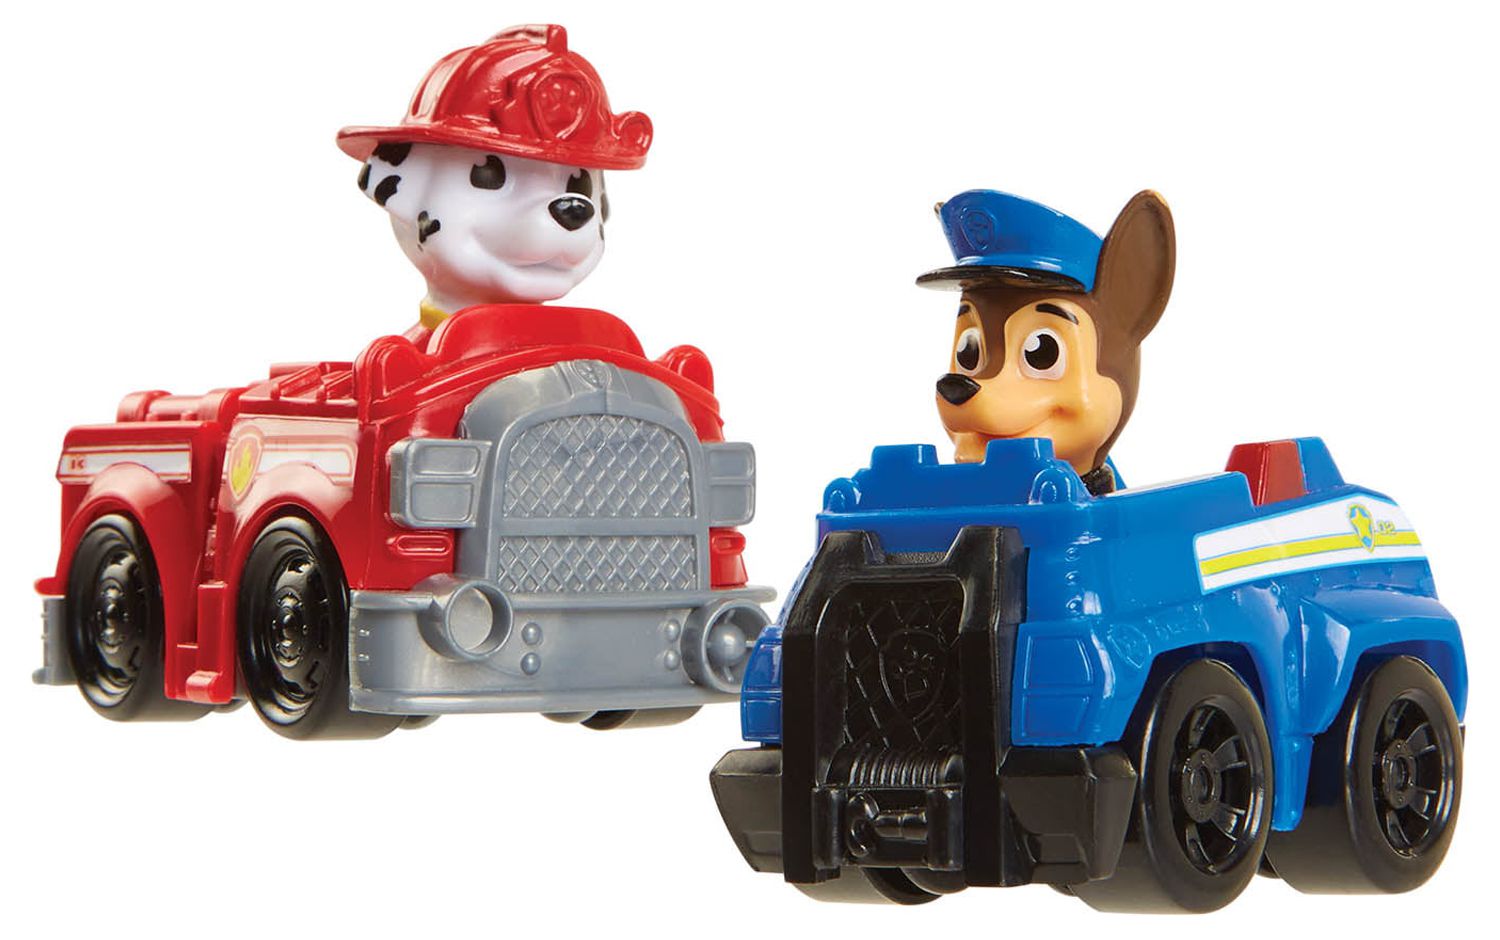 PAW Patrol Patroller Ride-On Includes Chase and Marshall Mini Vehicles - image 5 of 5